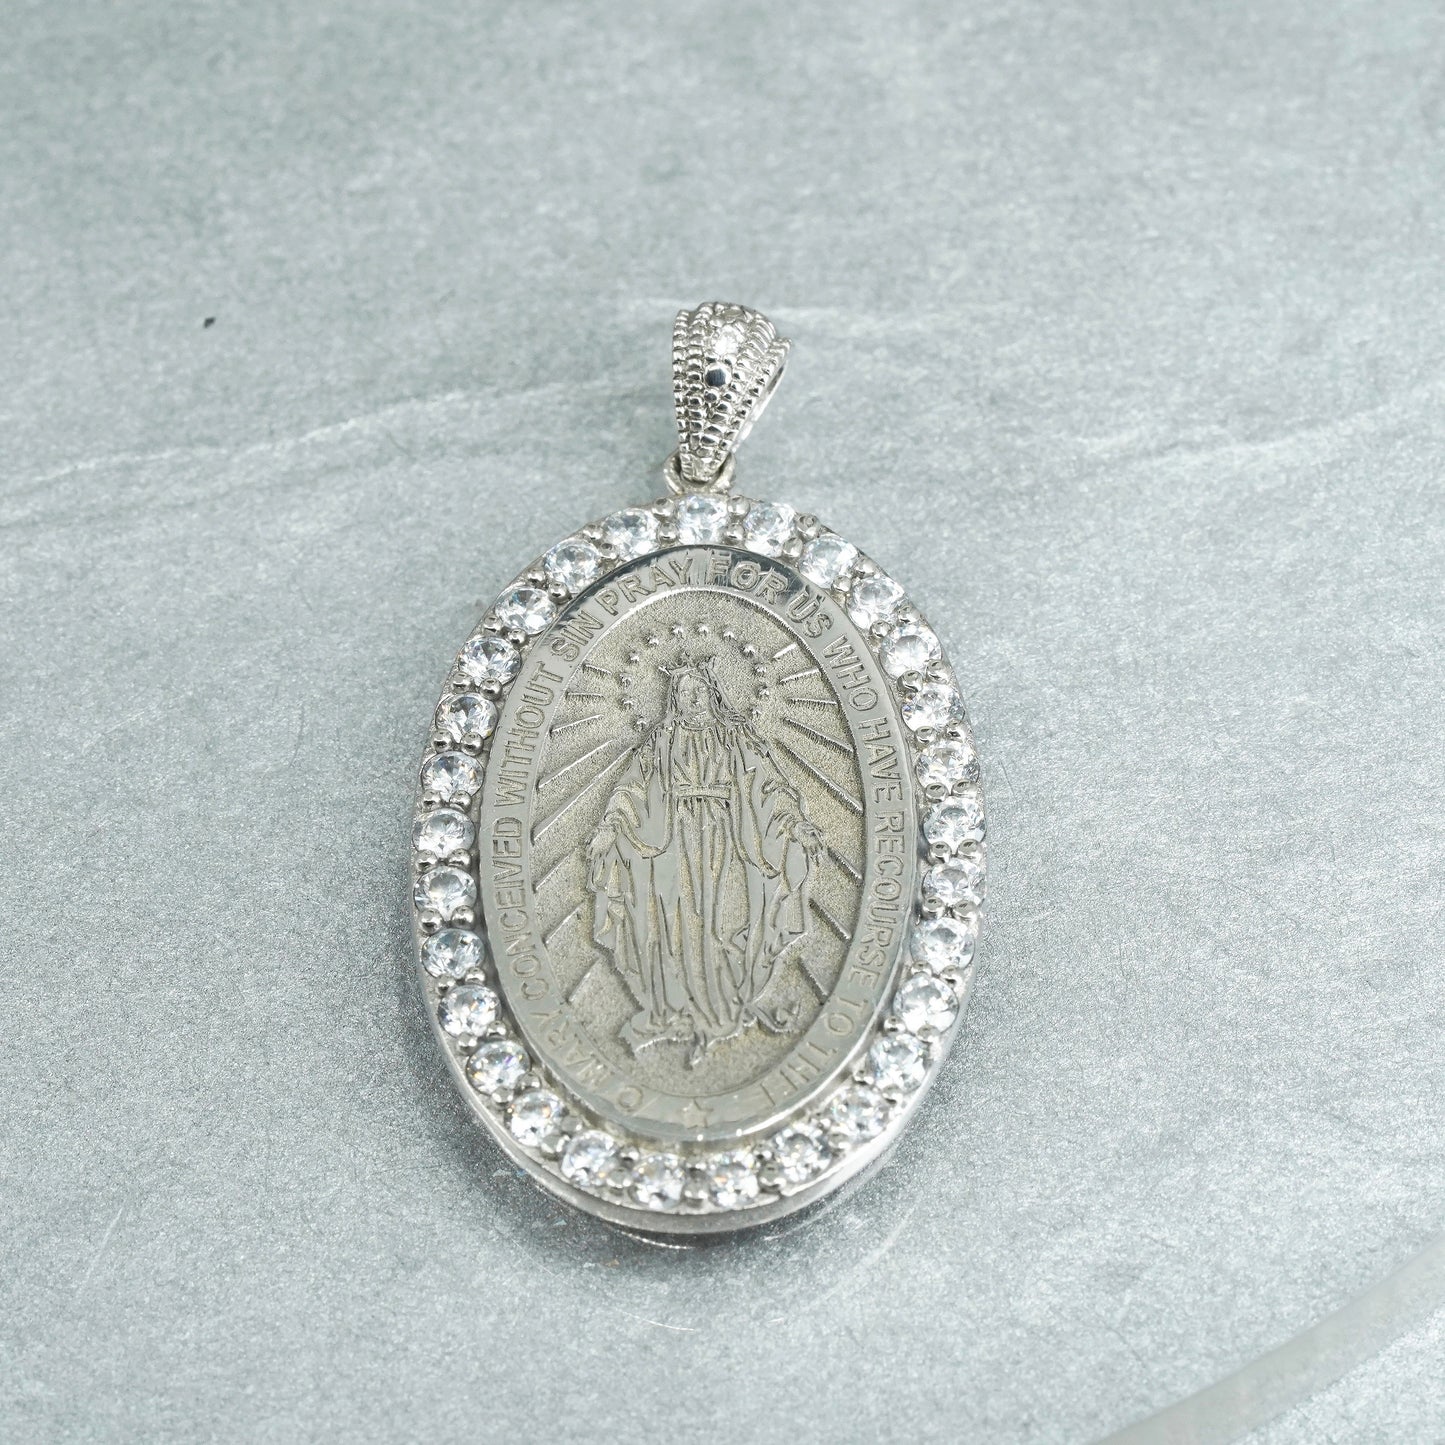 Vintage sterling 925 silver Virgin Mary pendant charm with cz engraved “Mary